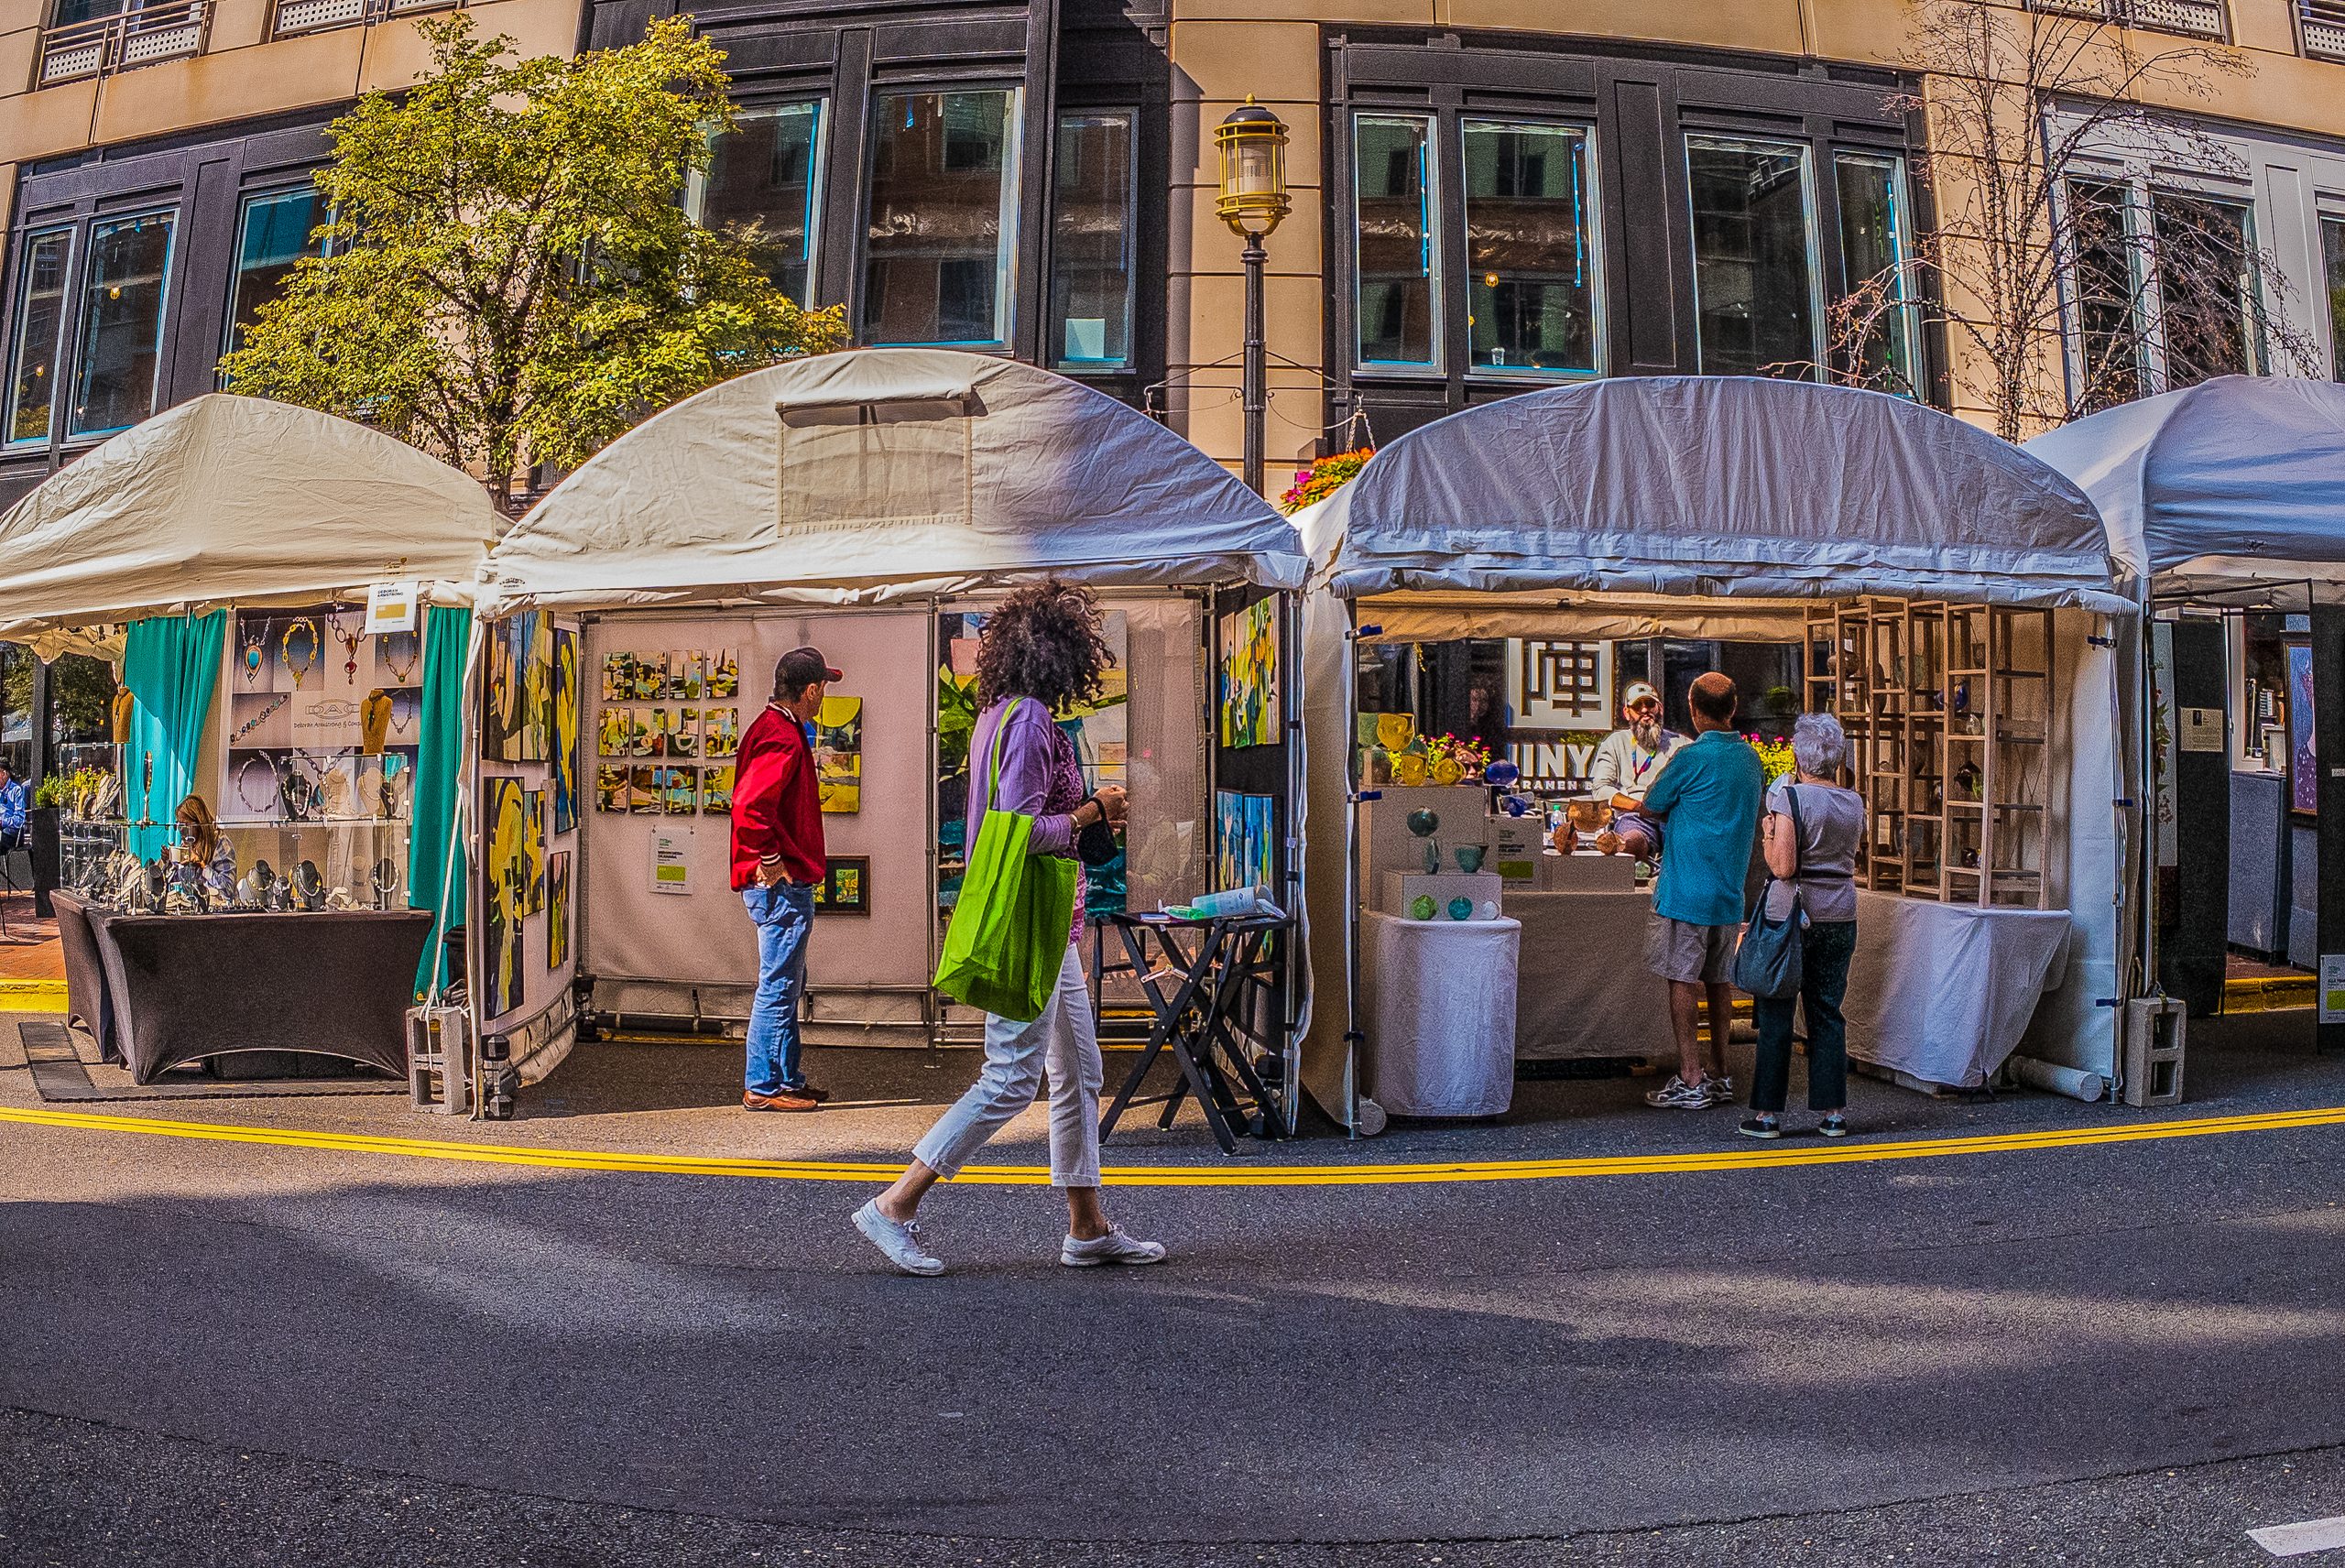 Reston, VA, USA -- Sept 10, 2021. A woman walks by booths set up for the annual Northern Virginia Art Festival in Reston, VA.